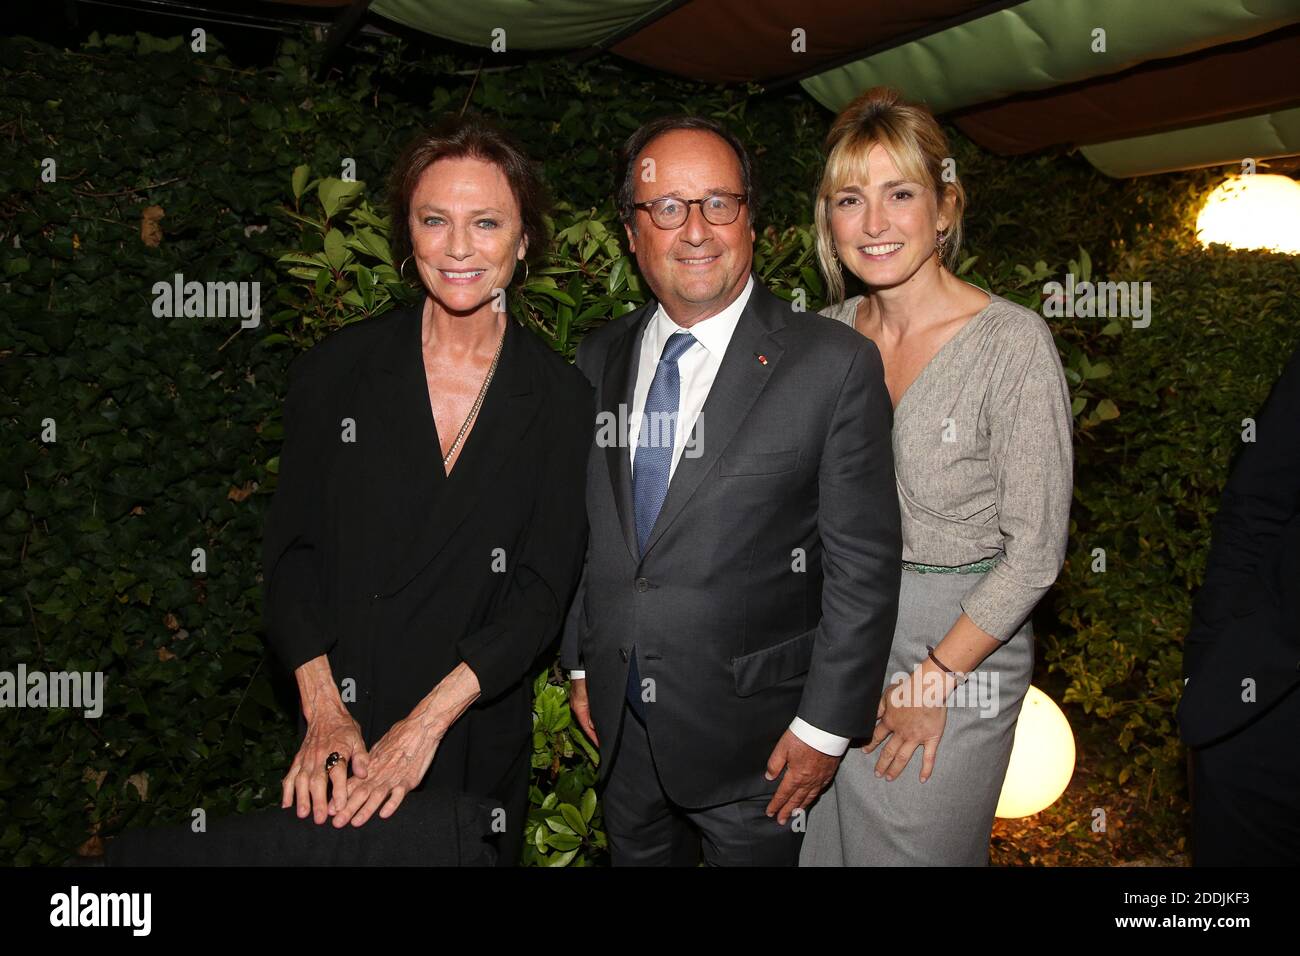 Exclusive - Jacqueline Bisset, Former President Francois Hollande and his  partner Julie Gayet attending the opening dinner of the 12th Angouleme Film  Festival in Angouleme, France on August 20, 2019. Photo by